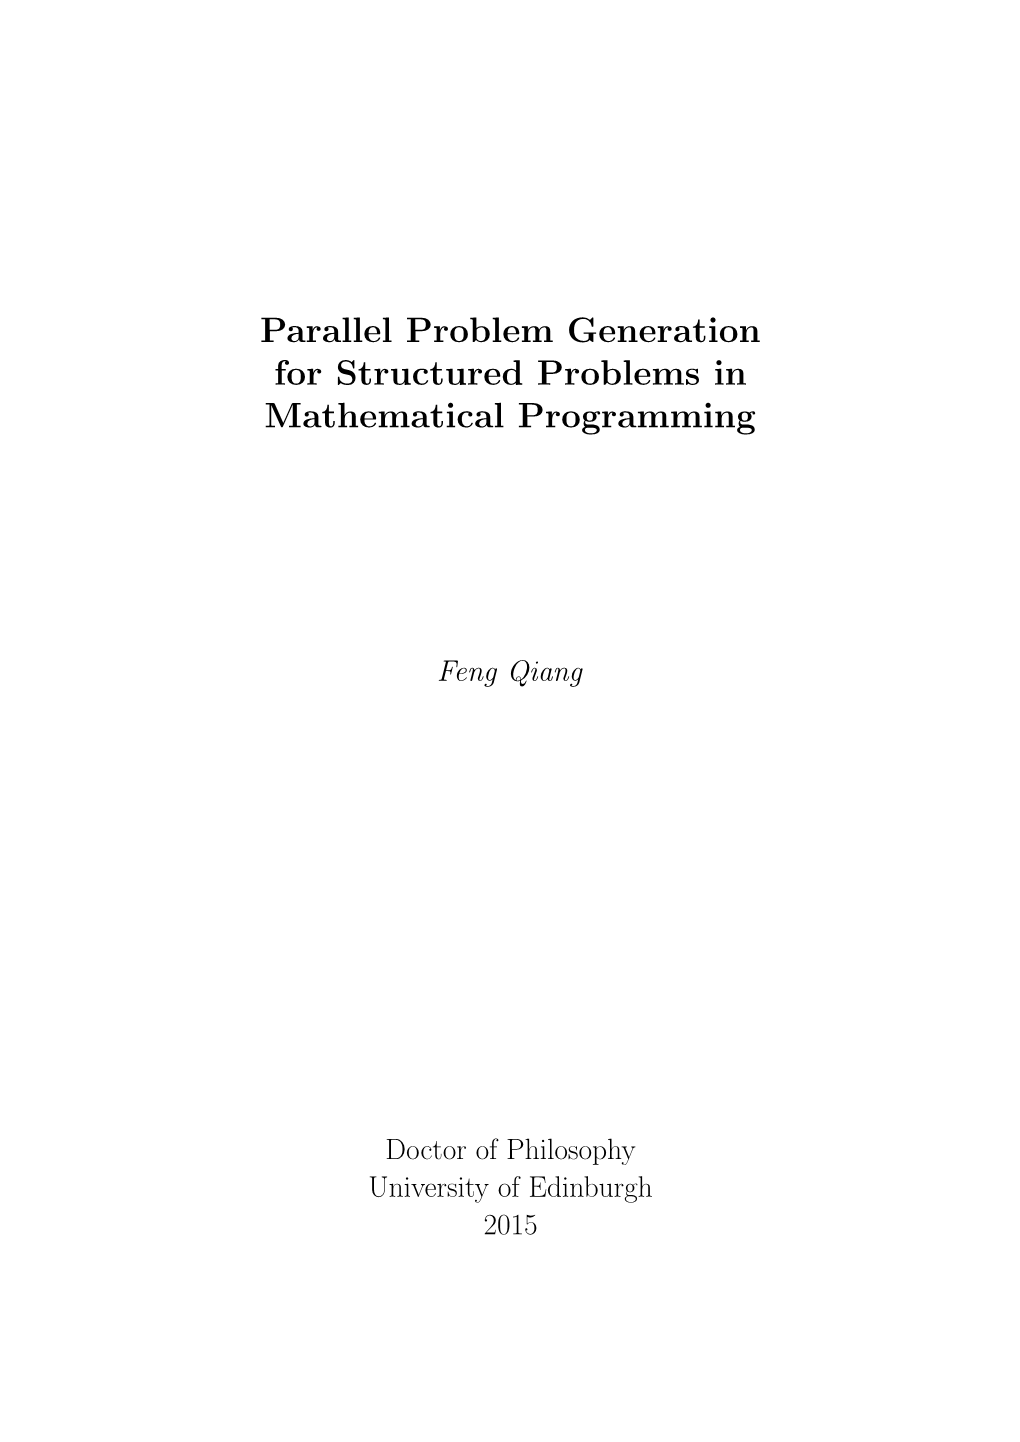 Parallel Problem Generation for Structured Problems in Mathematical Programming